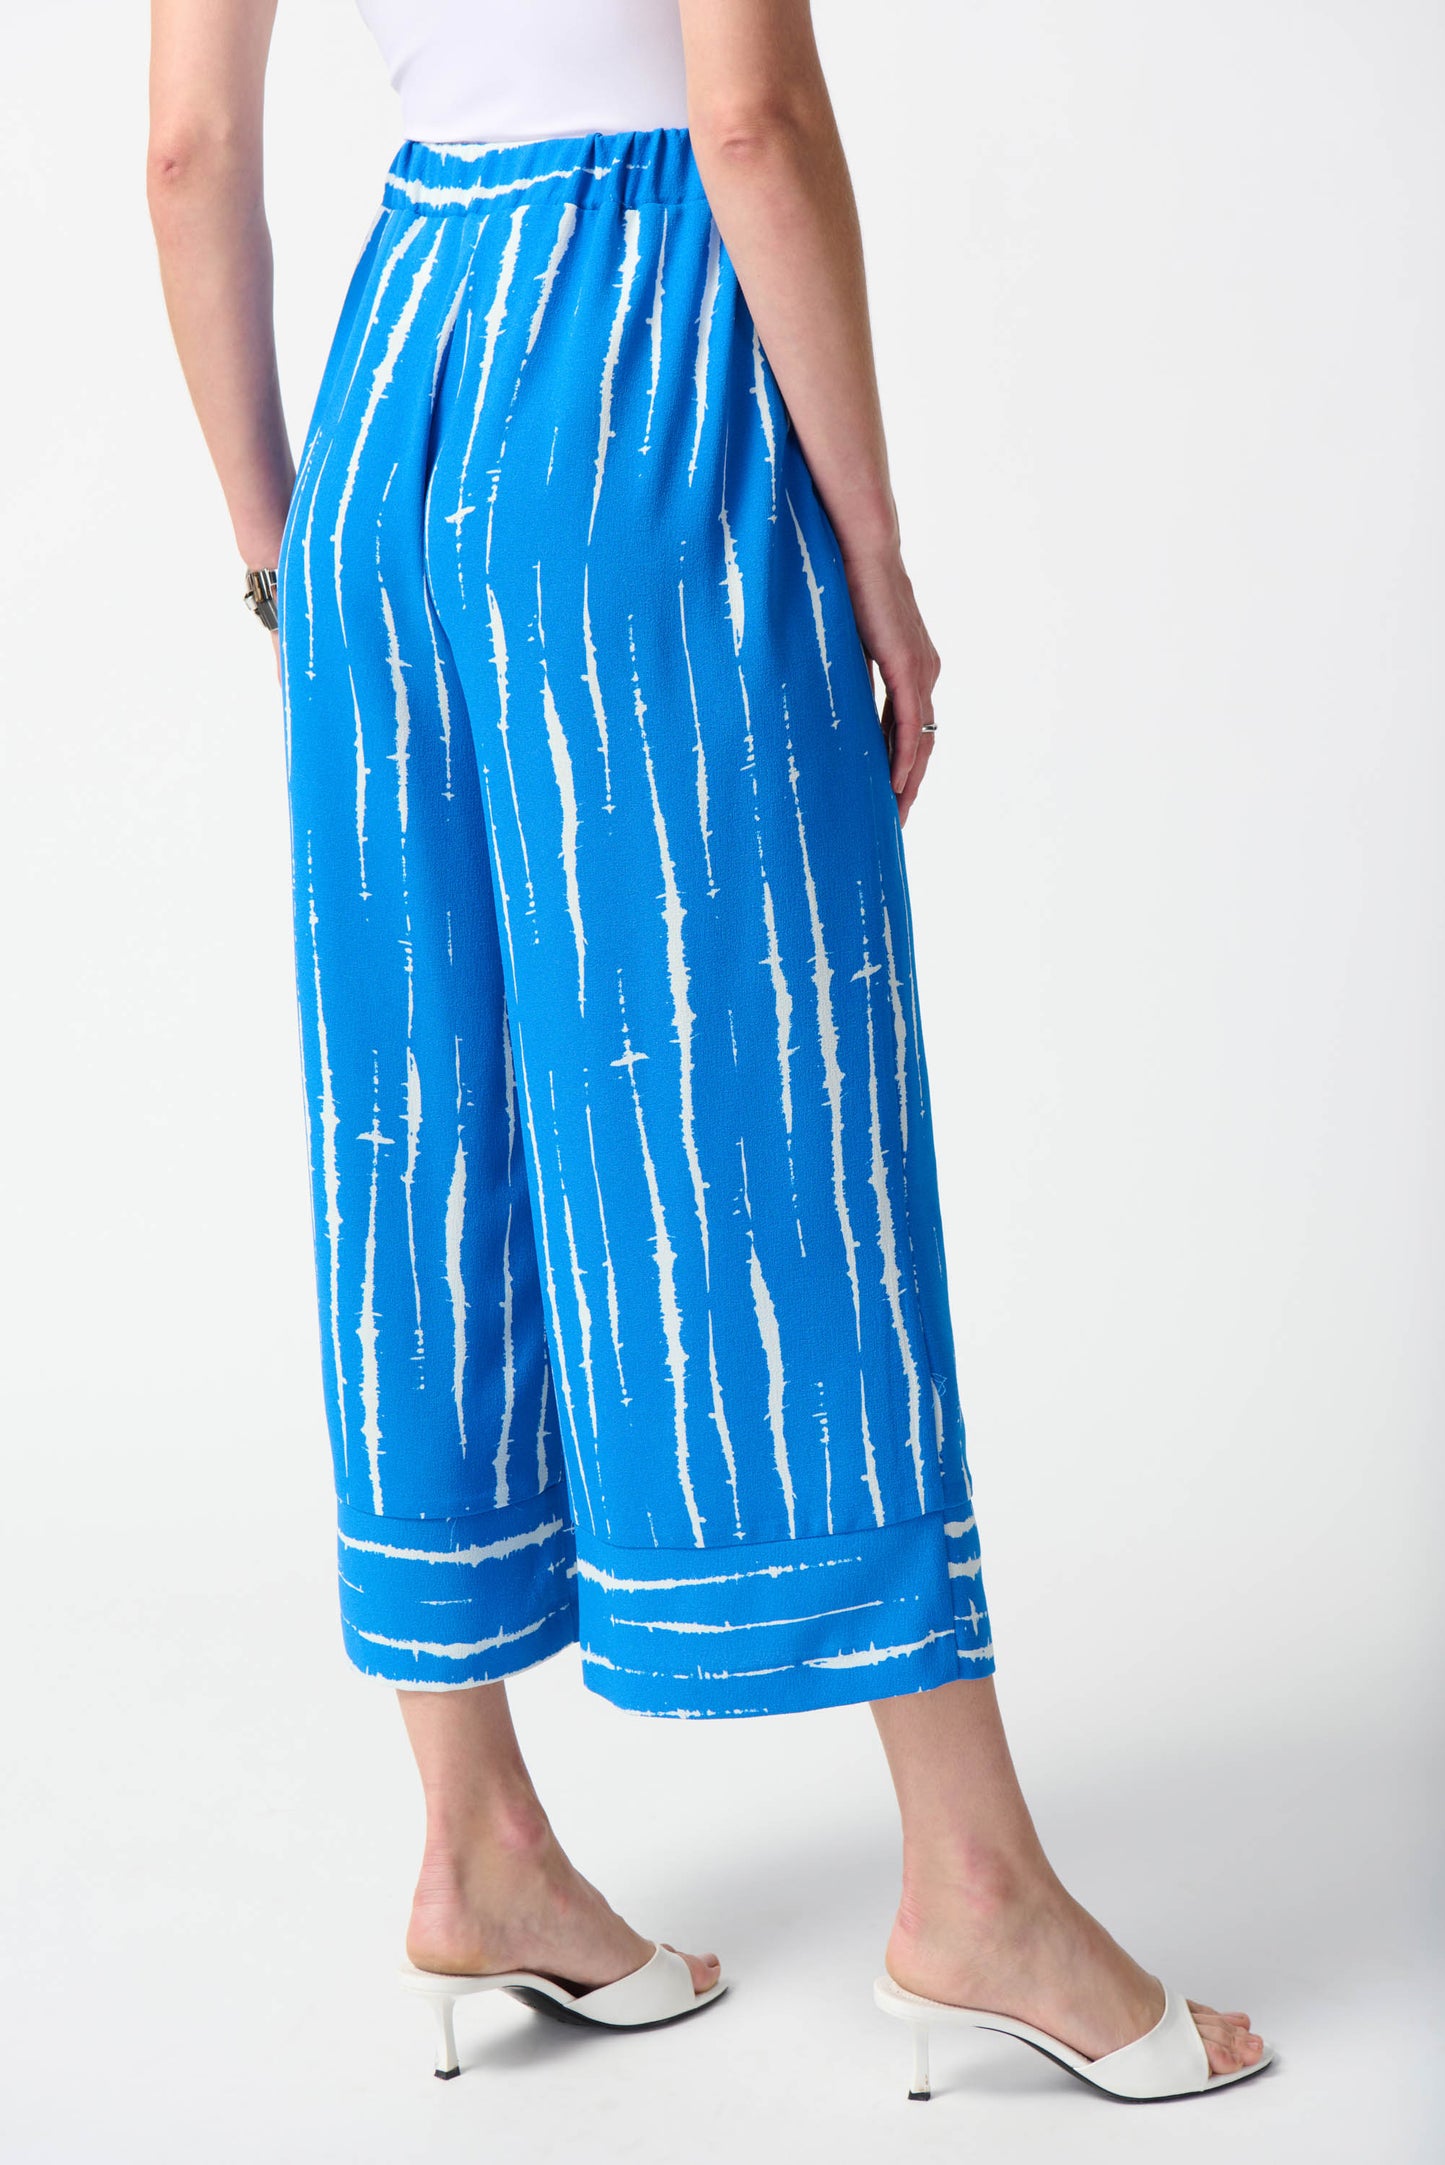 Woven Abstract Print Culotte Pants
242047